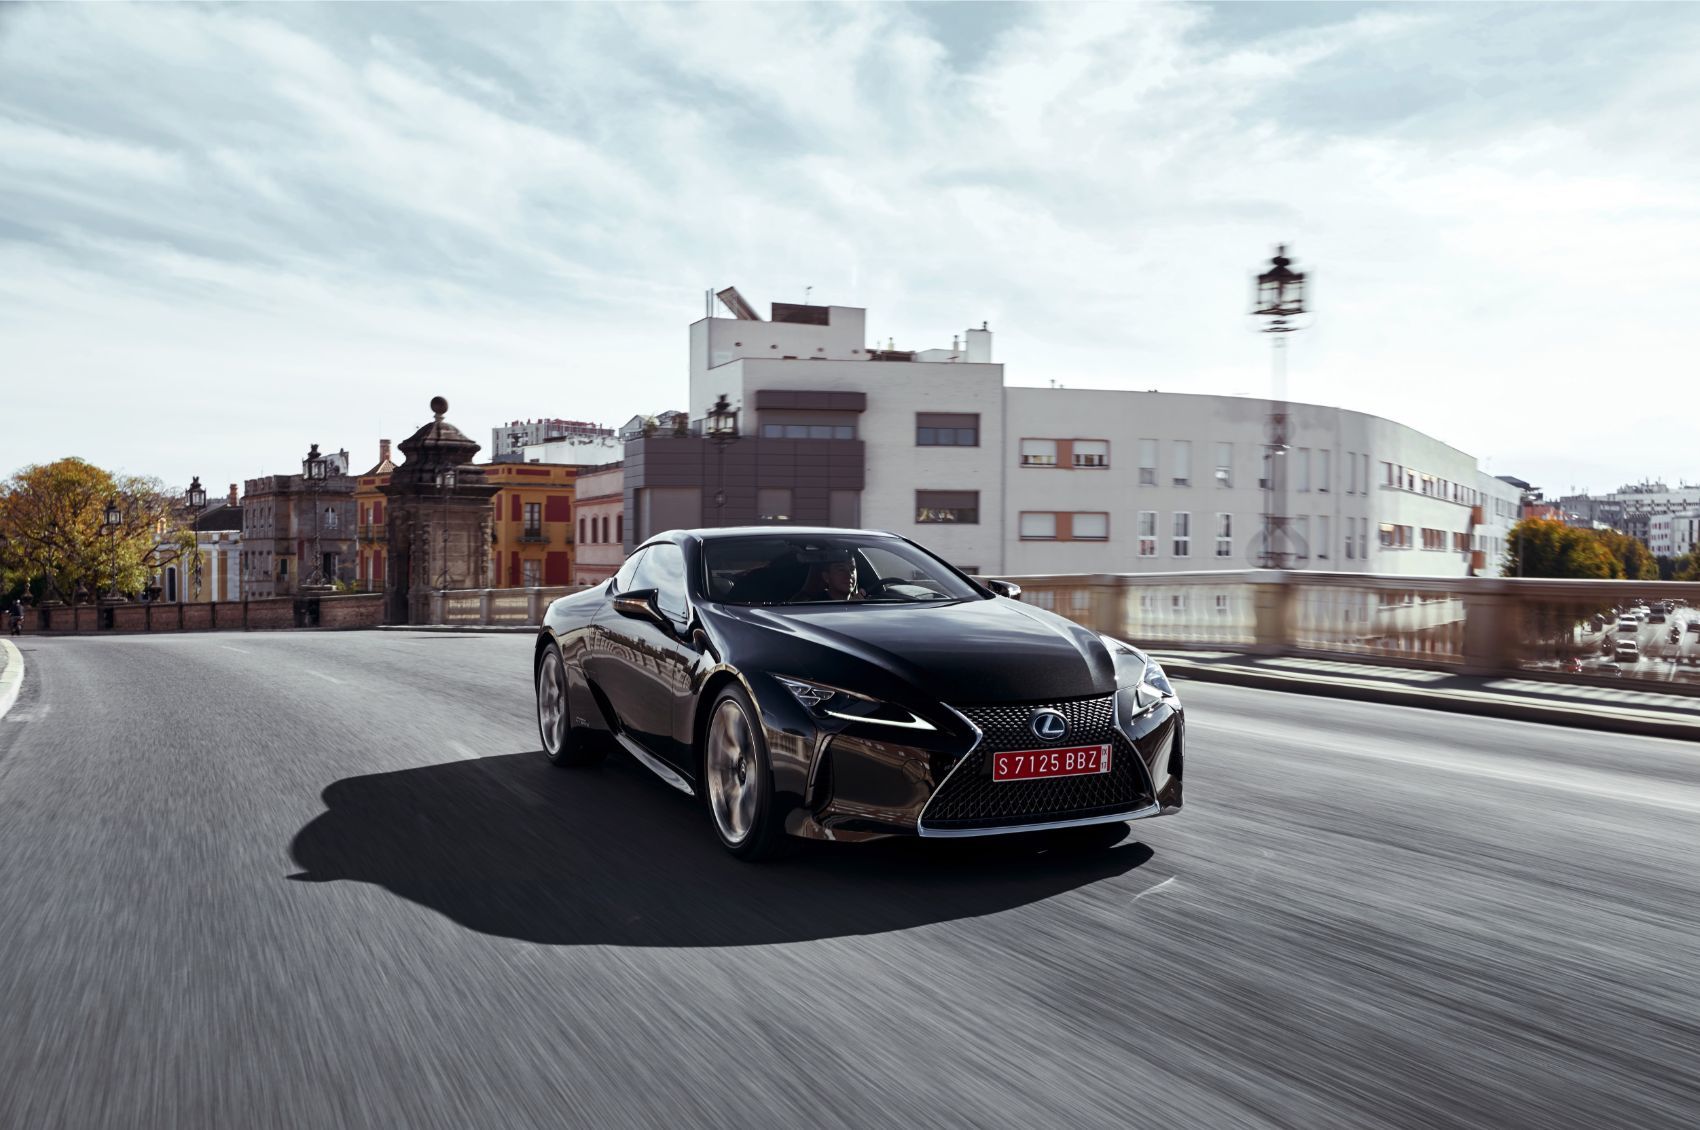 2019 Lexus LC 500h Review: Ideal Blend Between Performance & Luxury